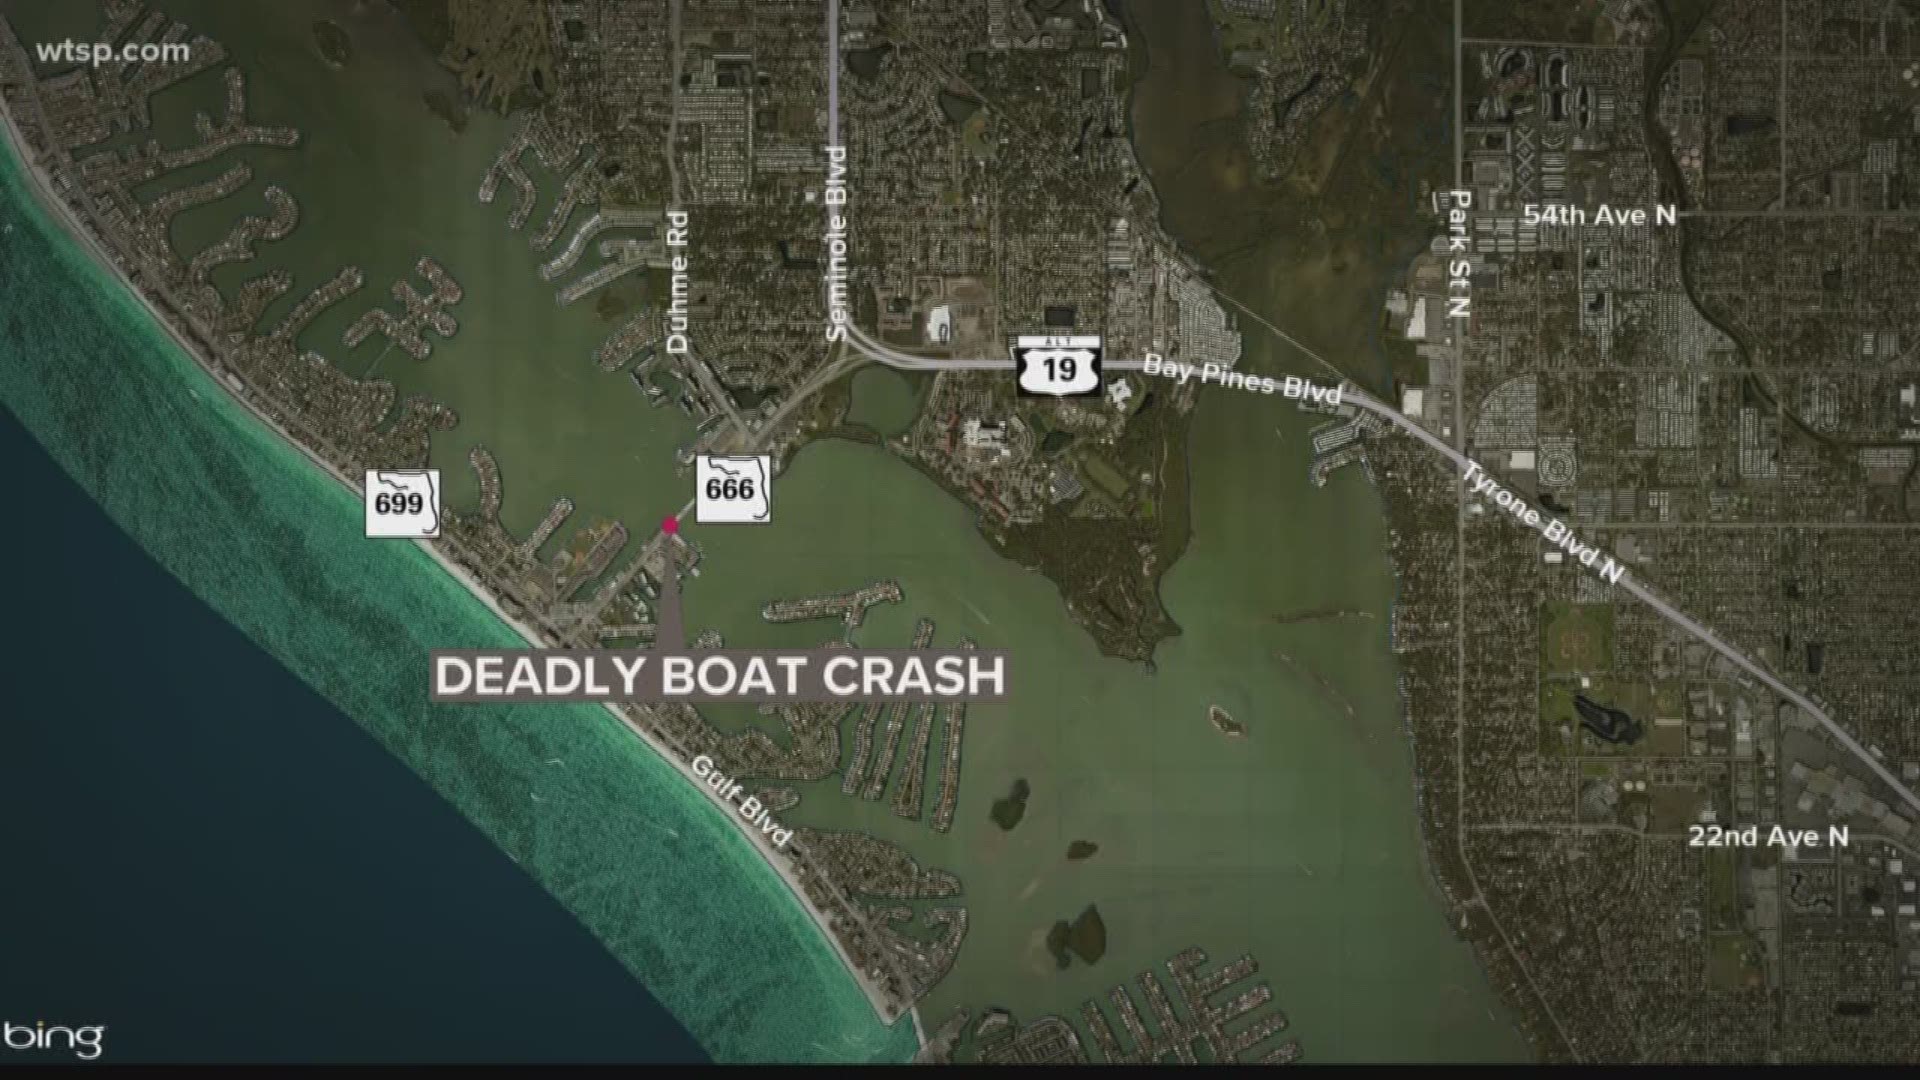 A 56-year-old man died after the Jet Ski he was riding on was hit by a boat, according to the Pinellas County Sheriff's Office.

It happened just before 5 p.m. Friday.